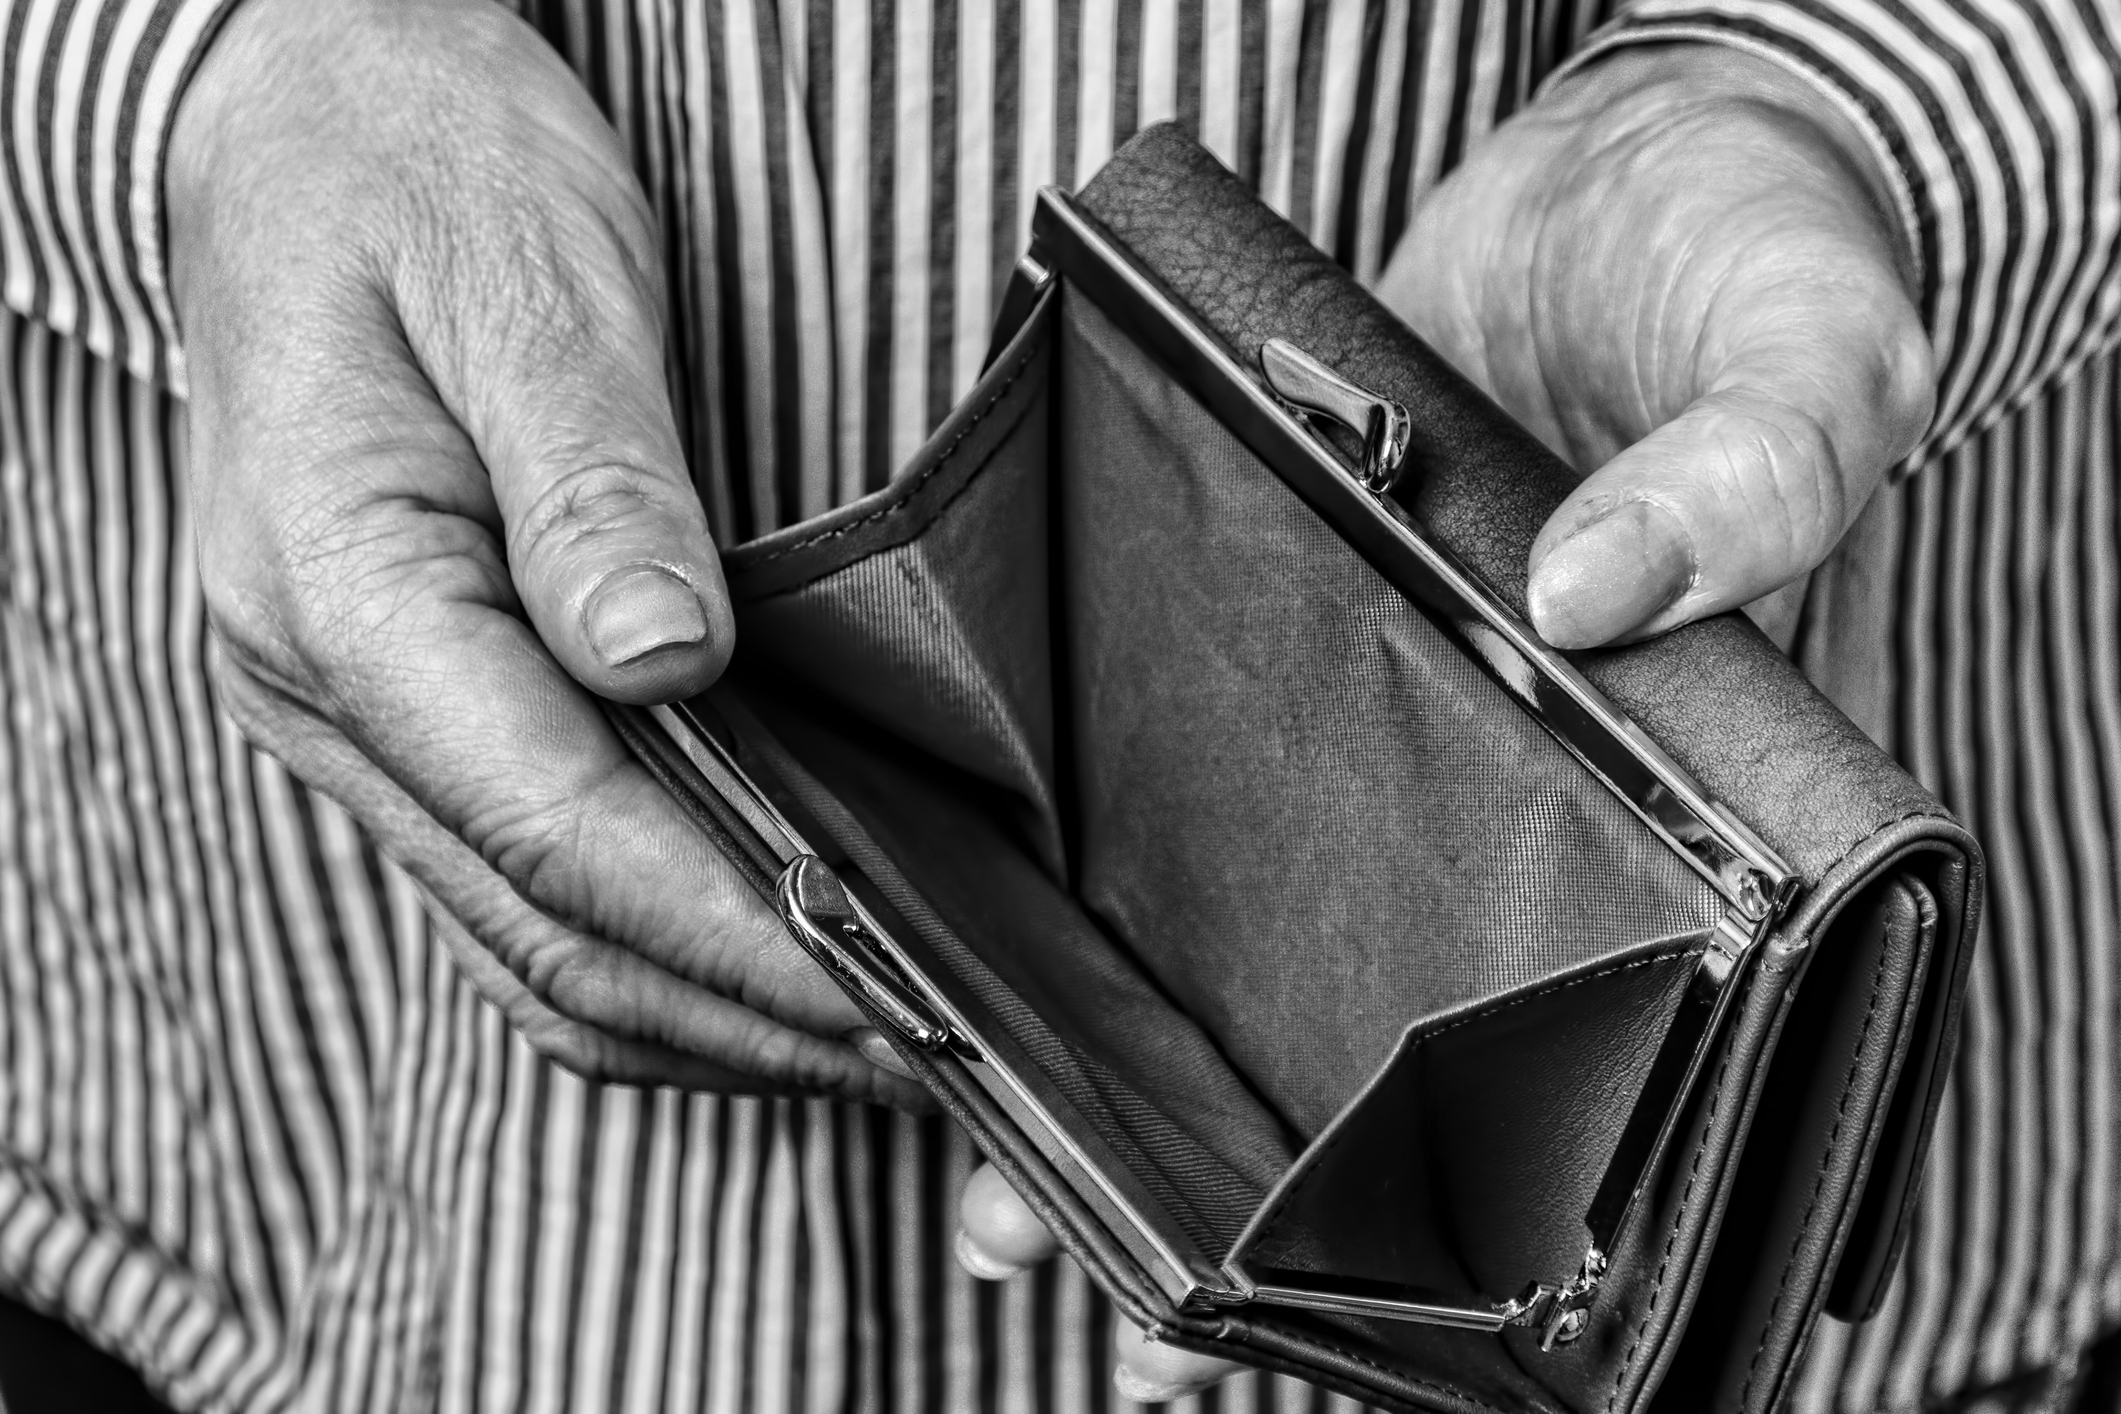 Black and white images of hands of an older person holding open an empty change purse of a wallet.